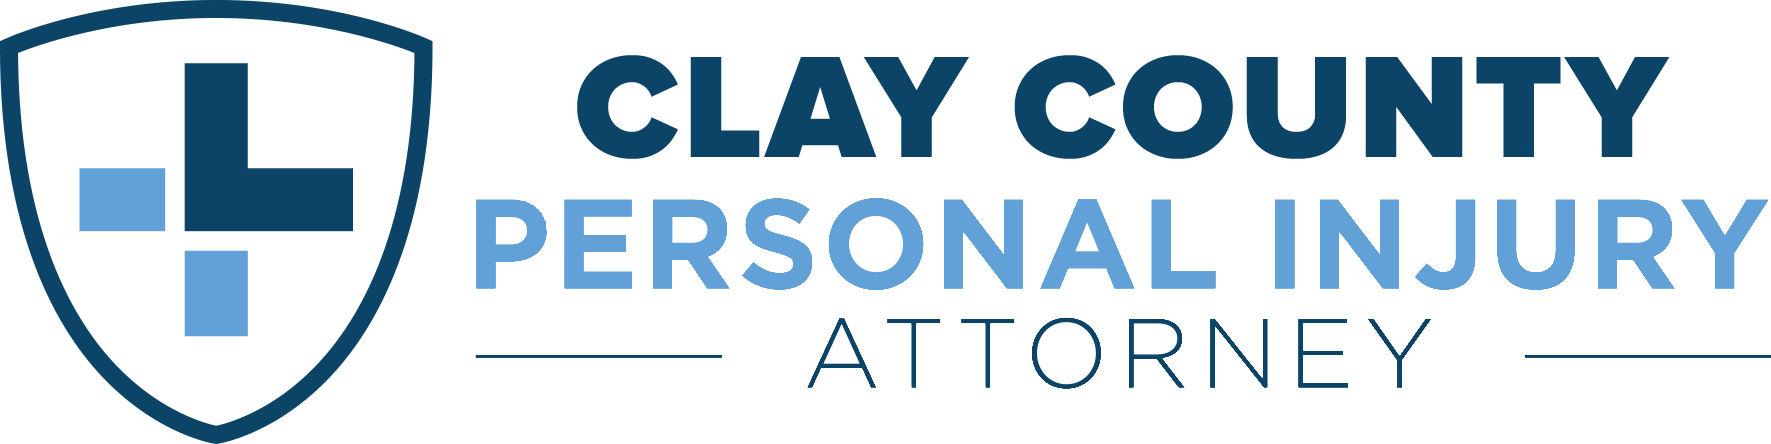 Clay County Personal Injury Attorney logo